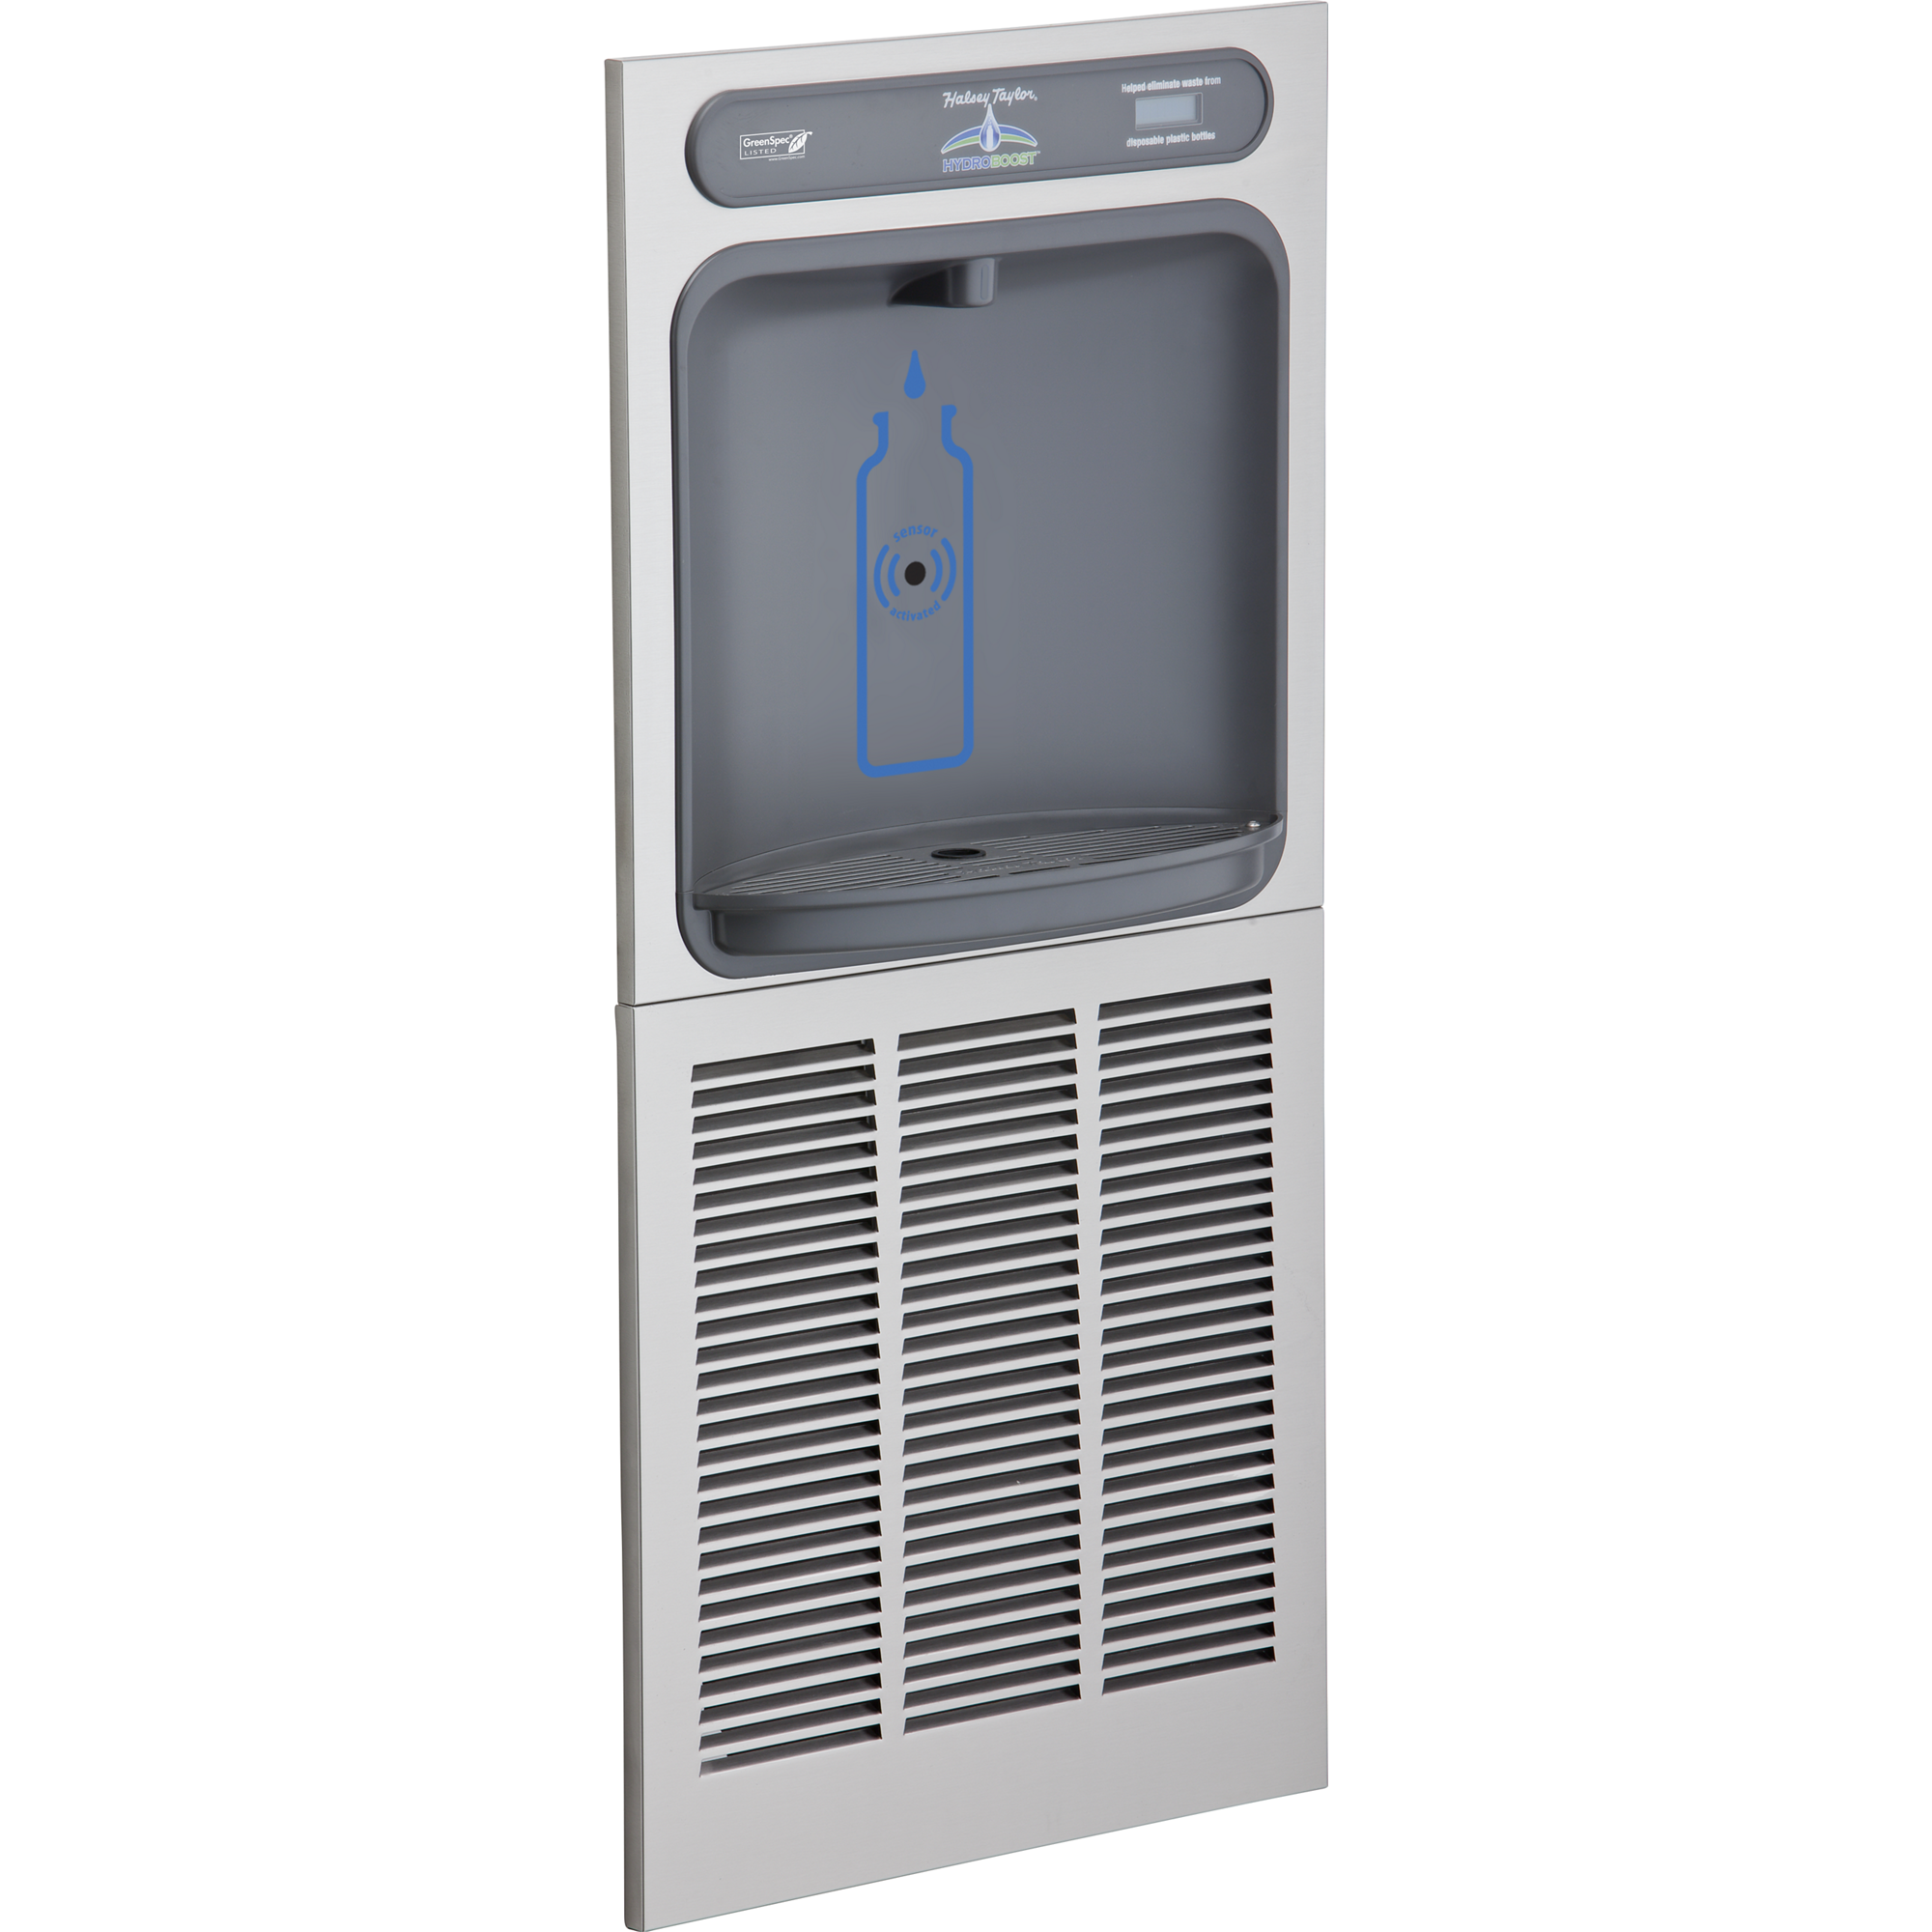 Halsey Taylor HTHB8-NF | In-wall Bottle Filler | Non-filtered, Refrigerated, Hands-free (comes with Mounting Frame)